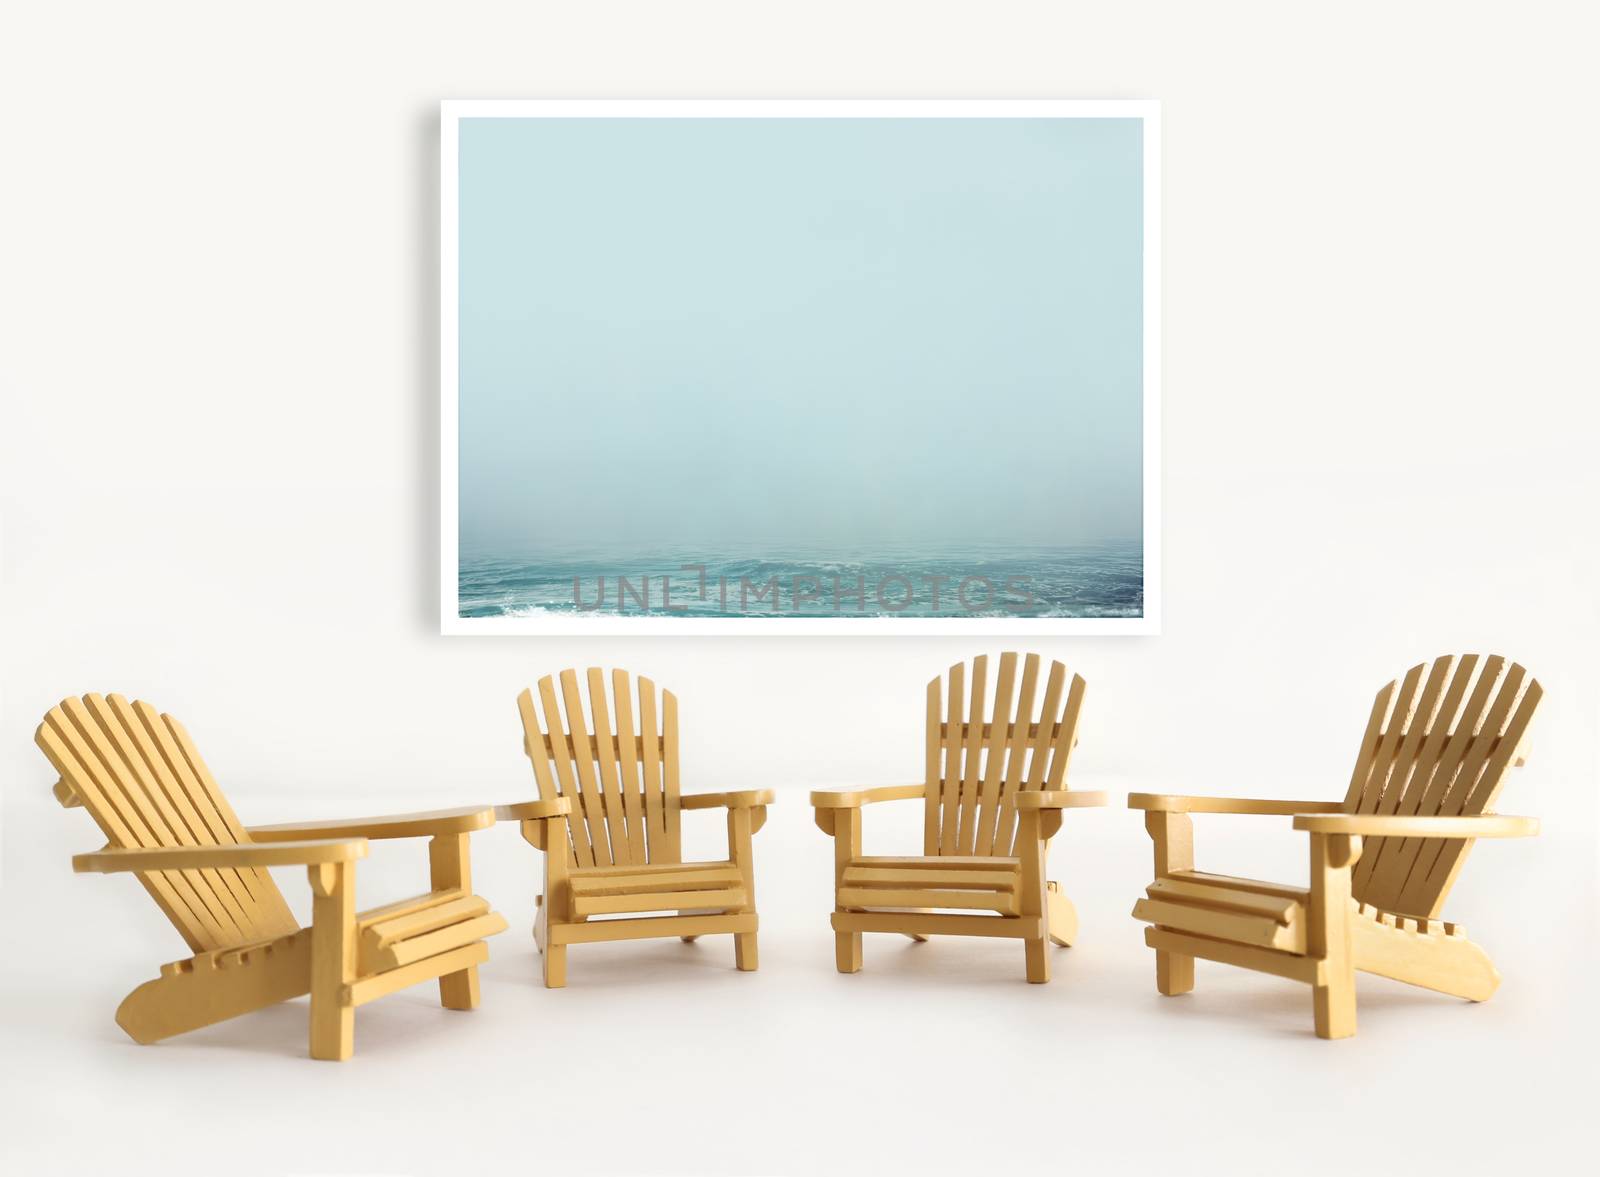 Four miniature adirondack chairs on white by Sandralise